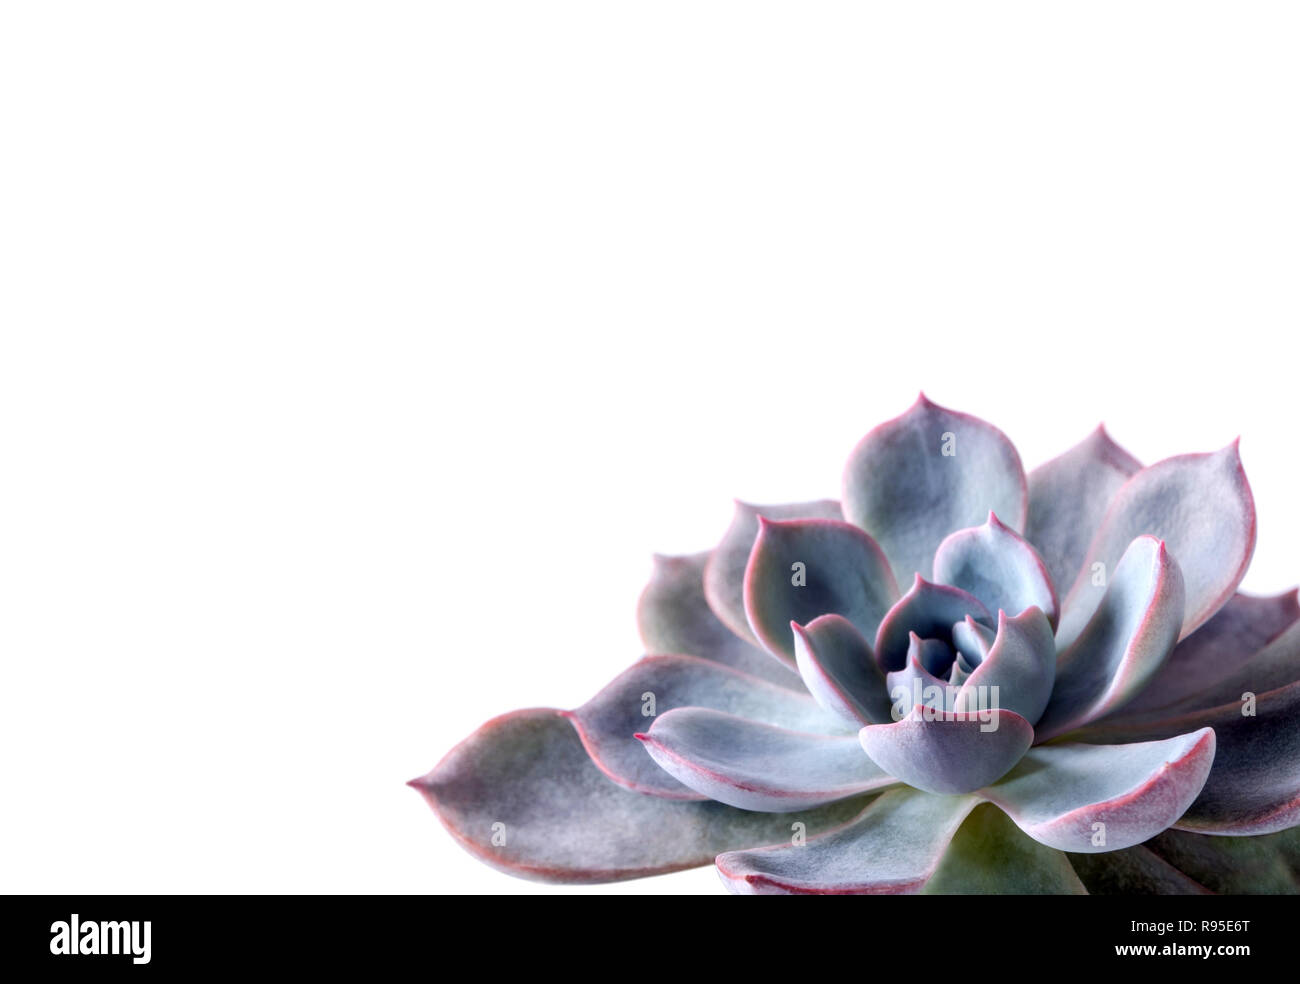 Succulent plant close-up, white wax on silver-blue leaves of Echeveria peacockii Subsessilis Stock Photo